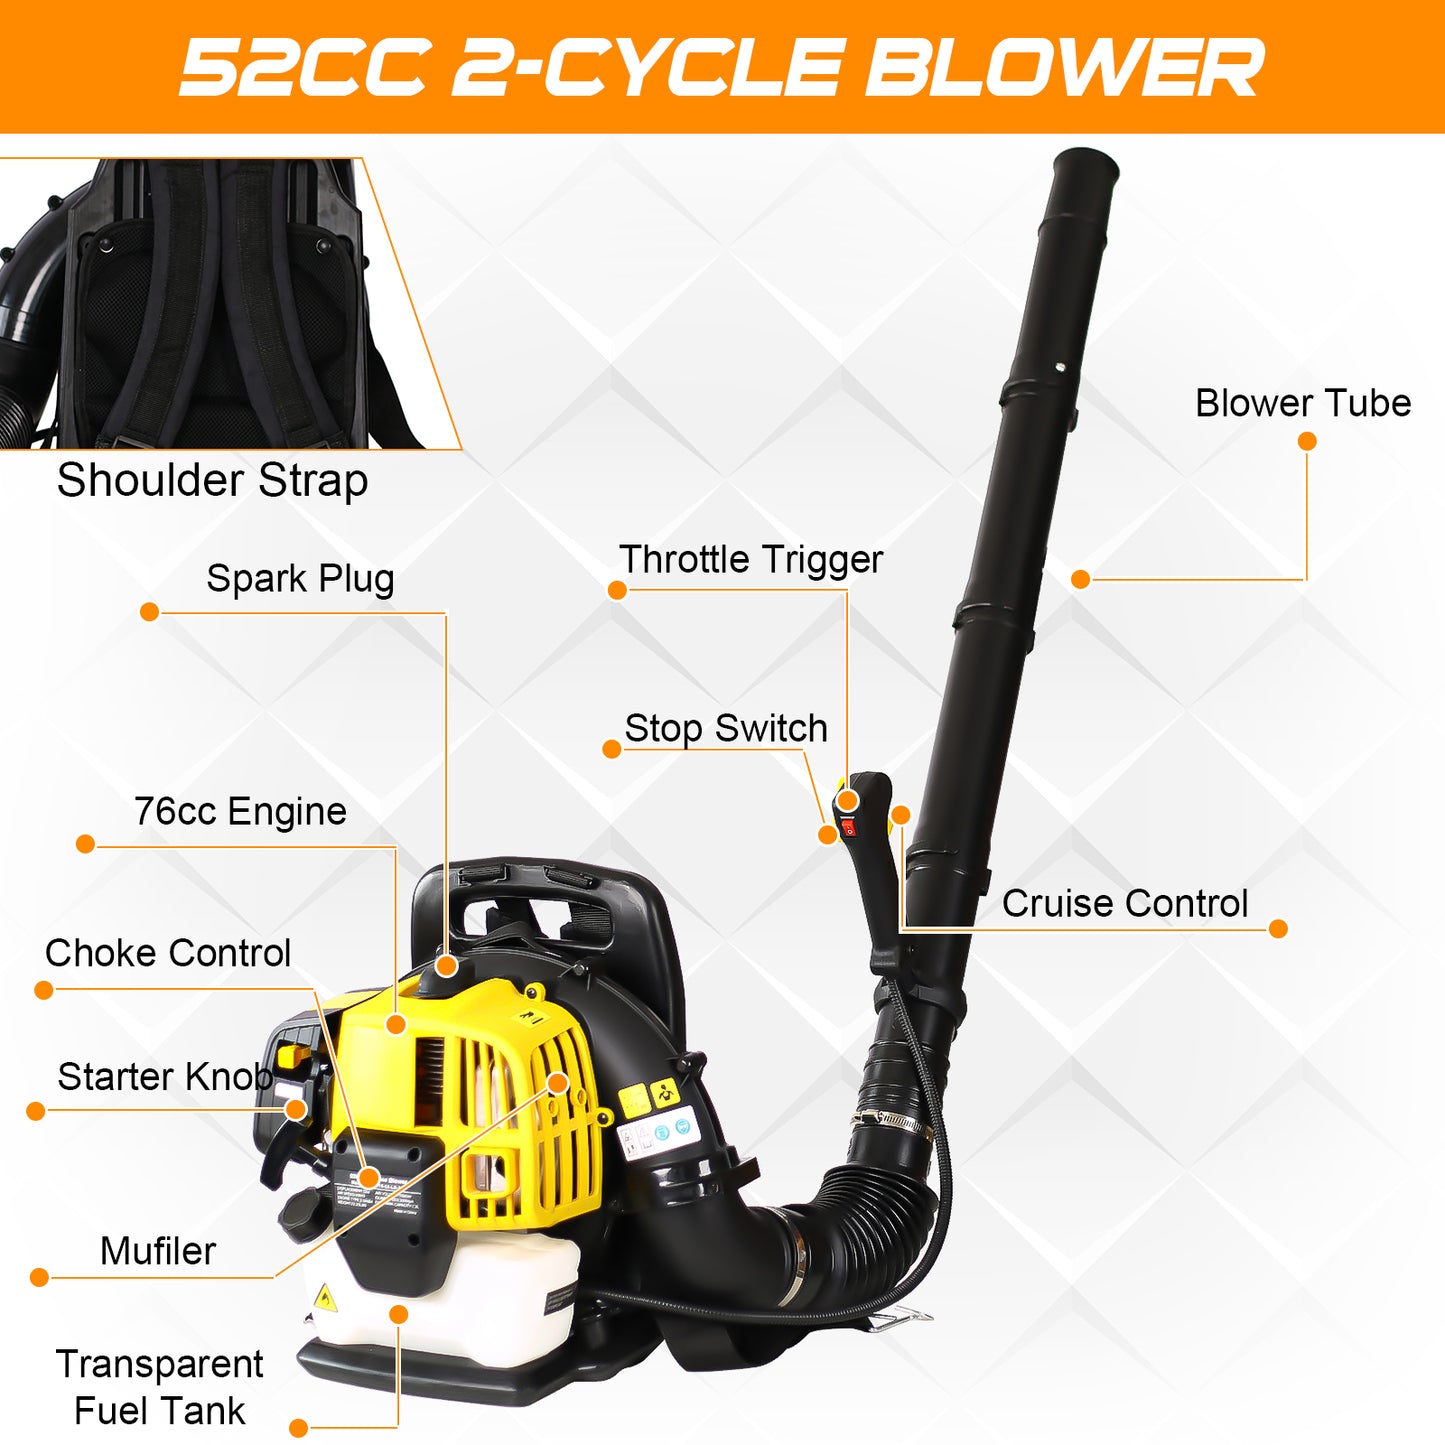 SYNGAR Cordless Leaf Blower Gas Powered Backpack with Extention Tube for Snow Blowing and Cleaning, 52CC 2-Cycle, Not for Sale in California, LJ2425